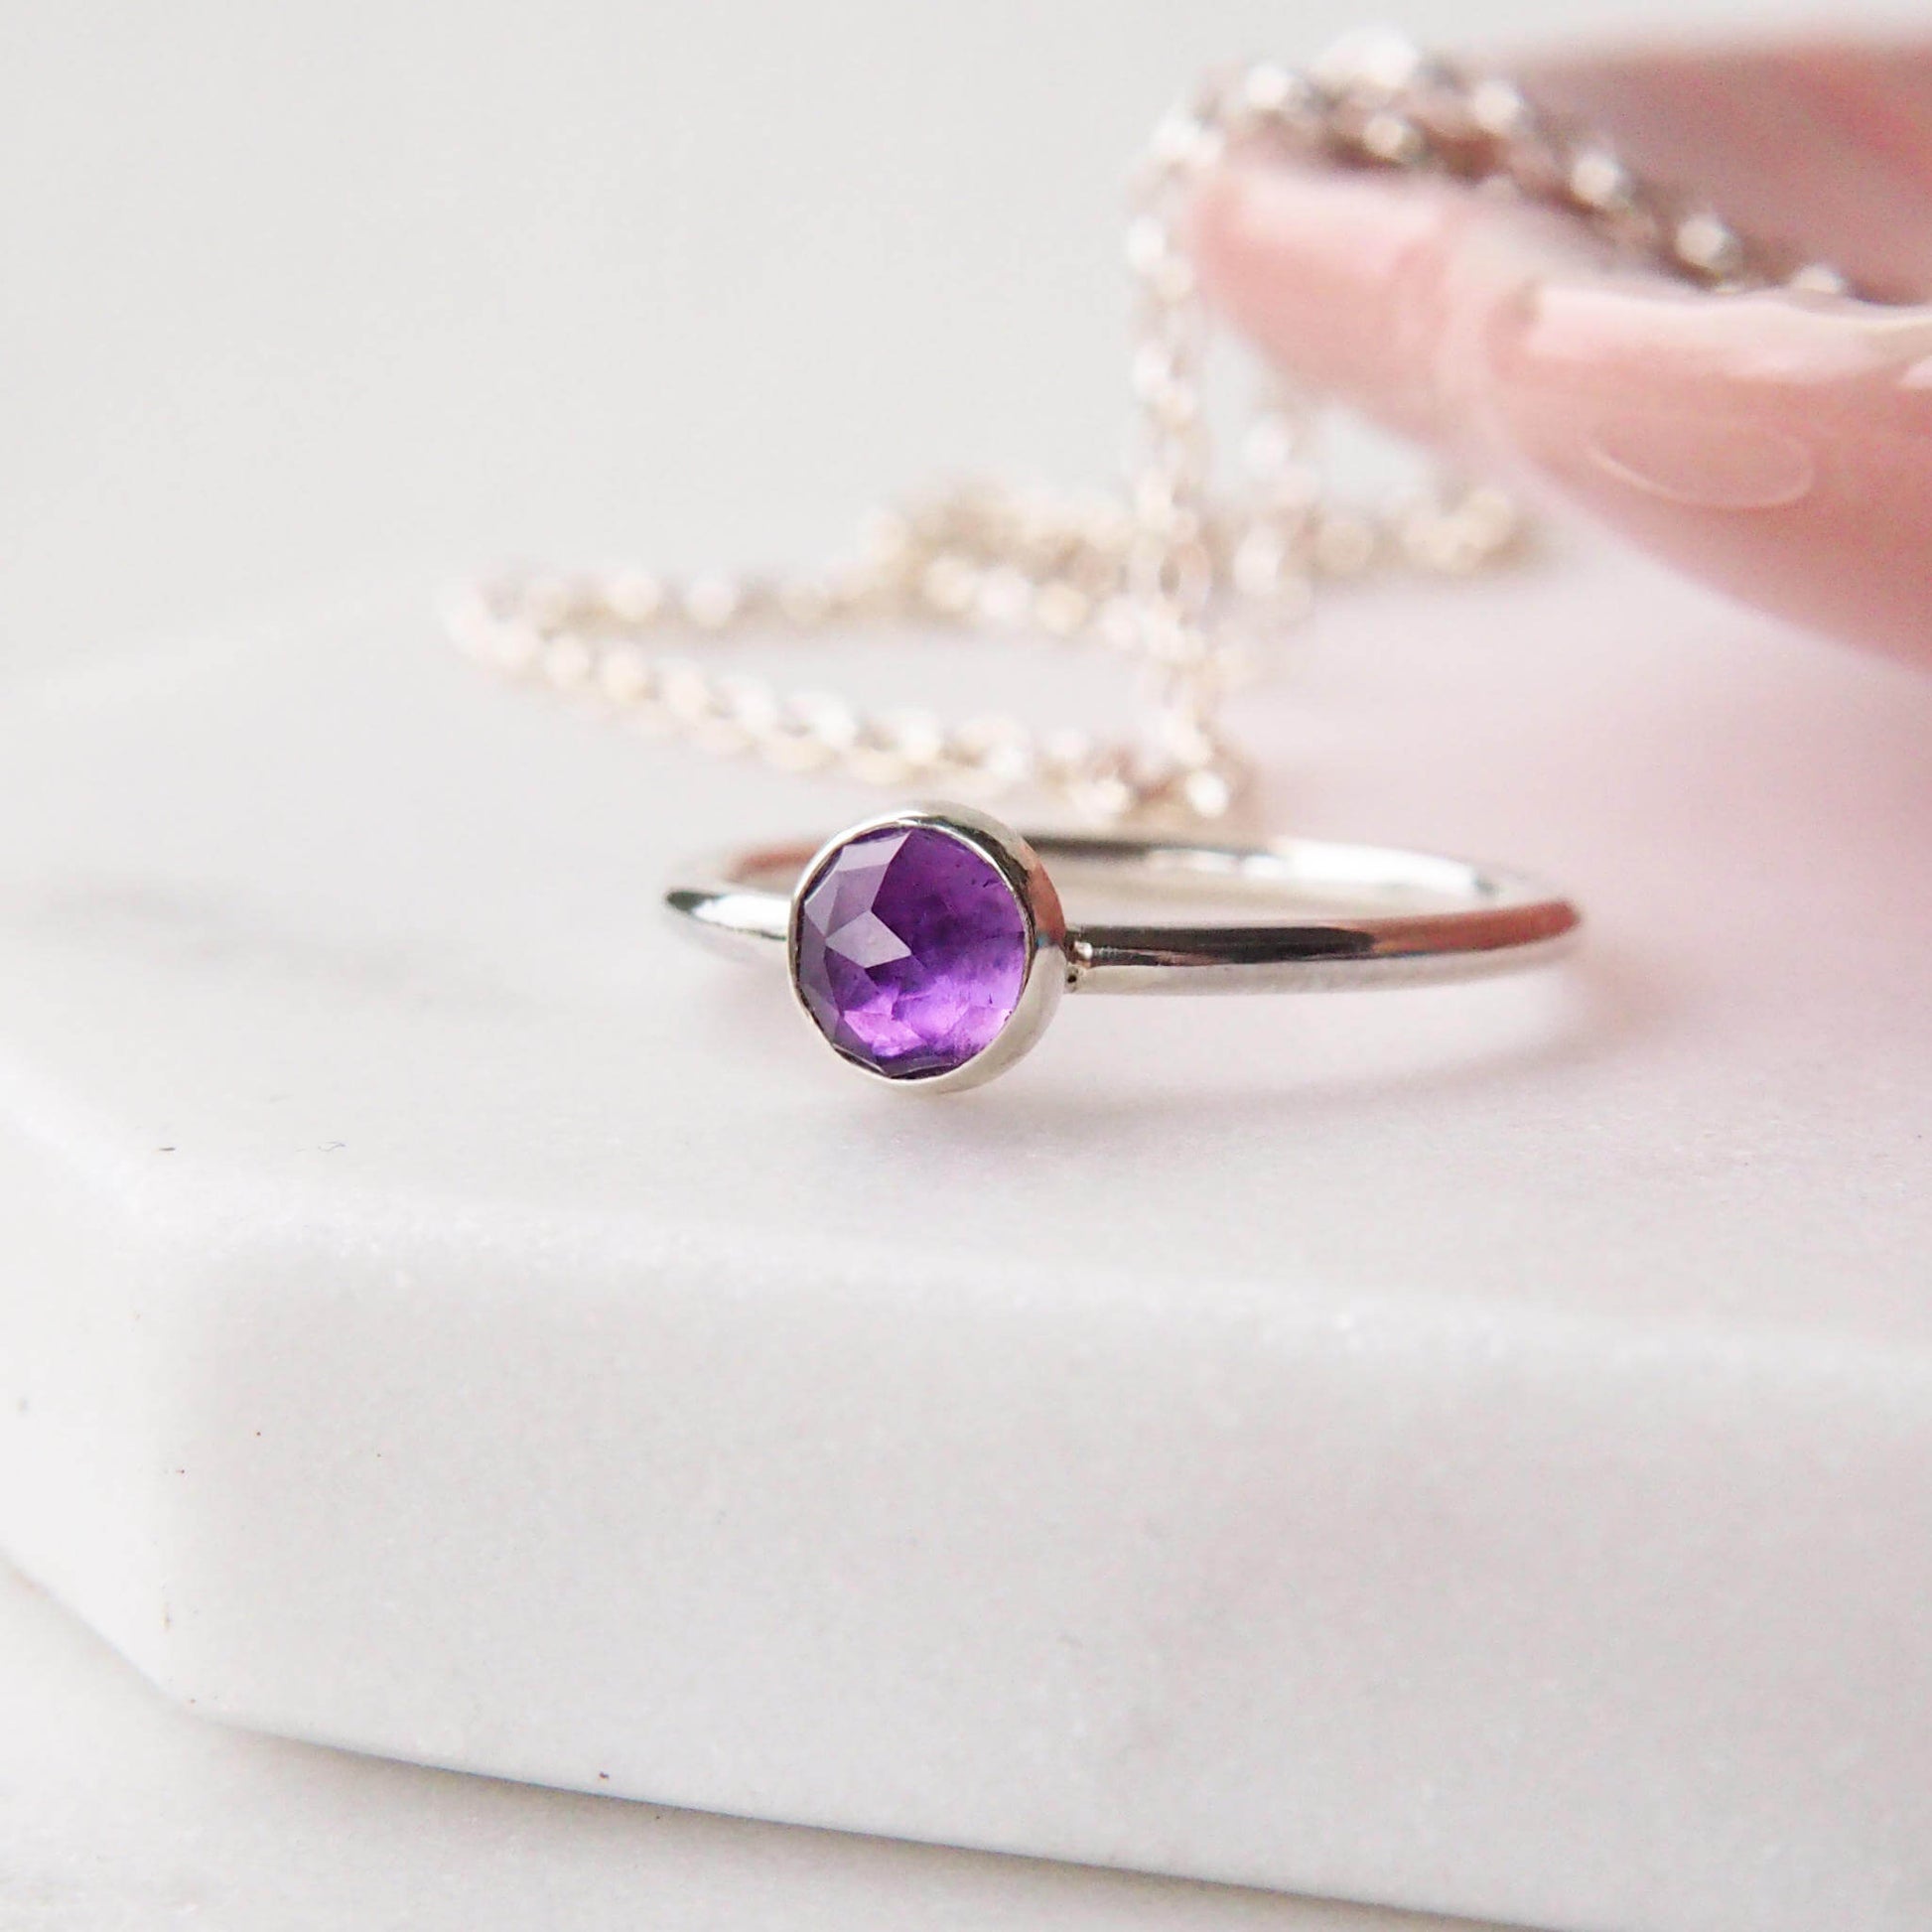 Solitaire sterling silver ring with a round 5mm purple Amethyst. The ring is made in a modern simple style with a 5mm round cabochon set onto a modern halo fully round band. Made to order to your ring size, and handmade in scotland by maram jewellery